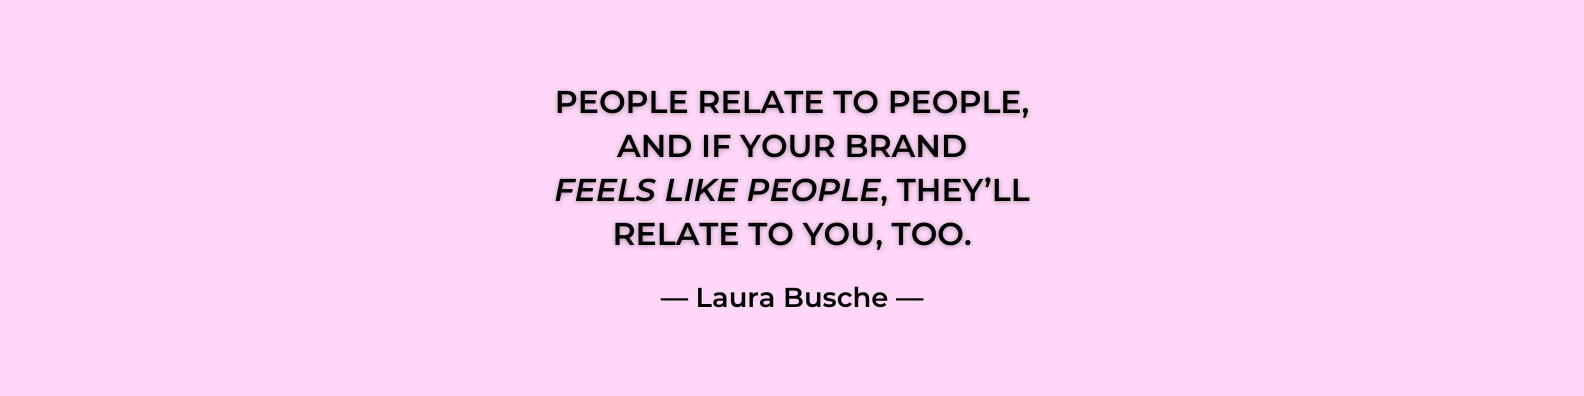 cost of market research quote about branding personalization